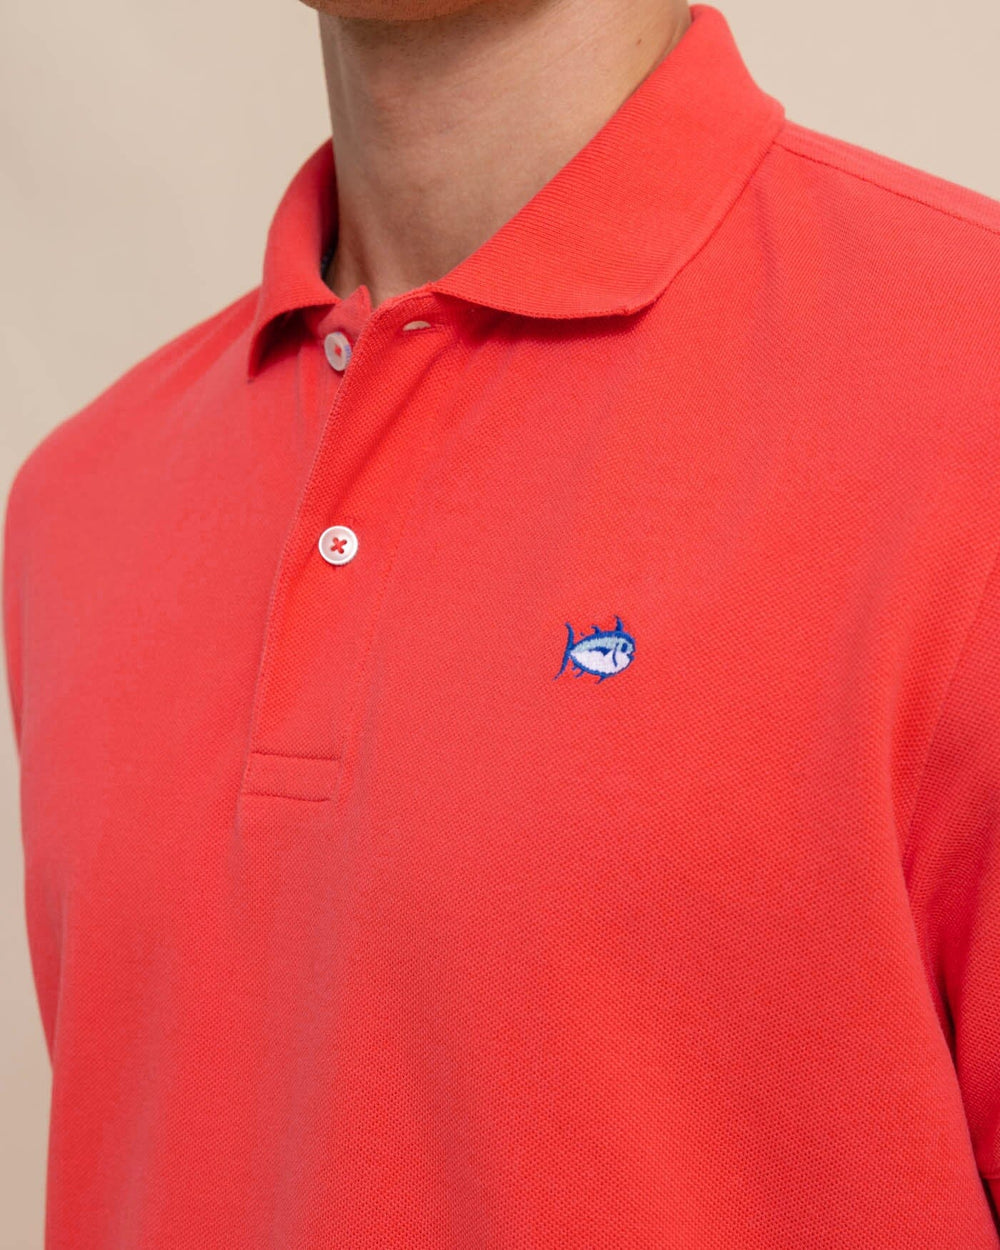 The detail view of the Southern Tide new-skipjack-polo-shirt by Southern Tide - Paprika Red